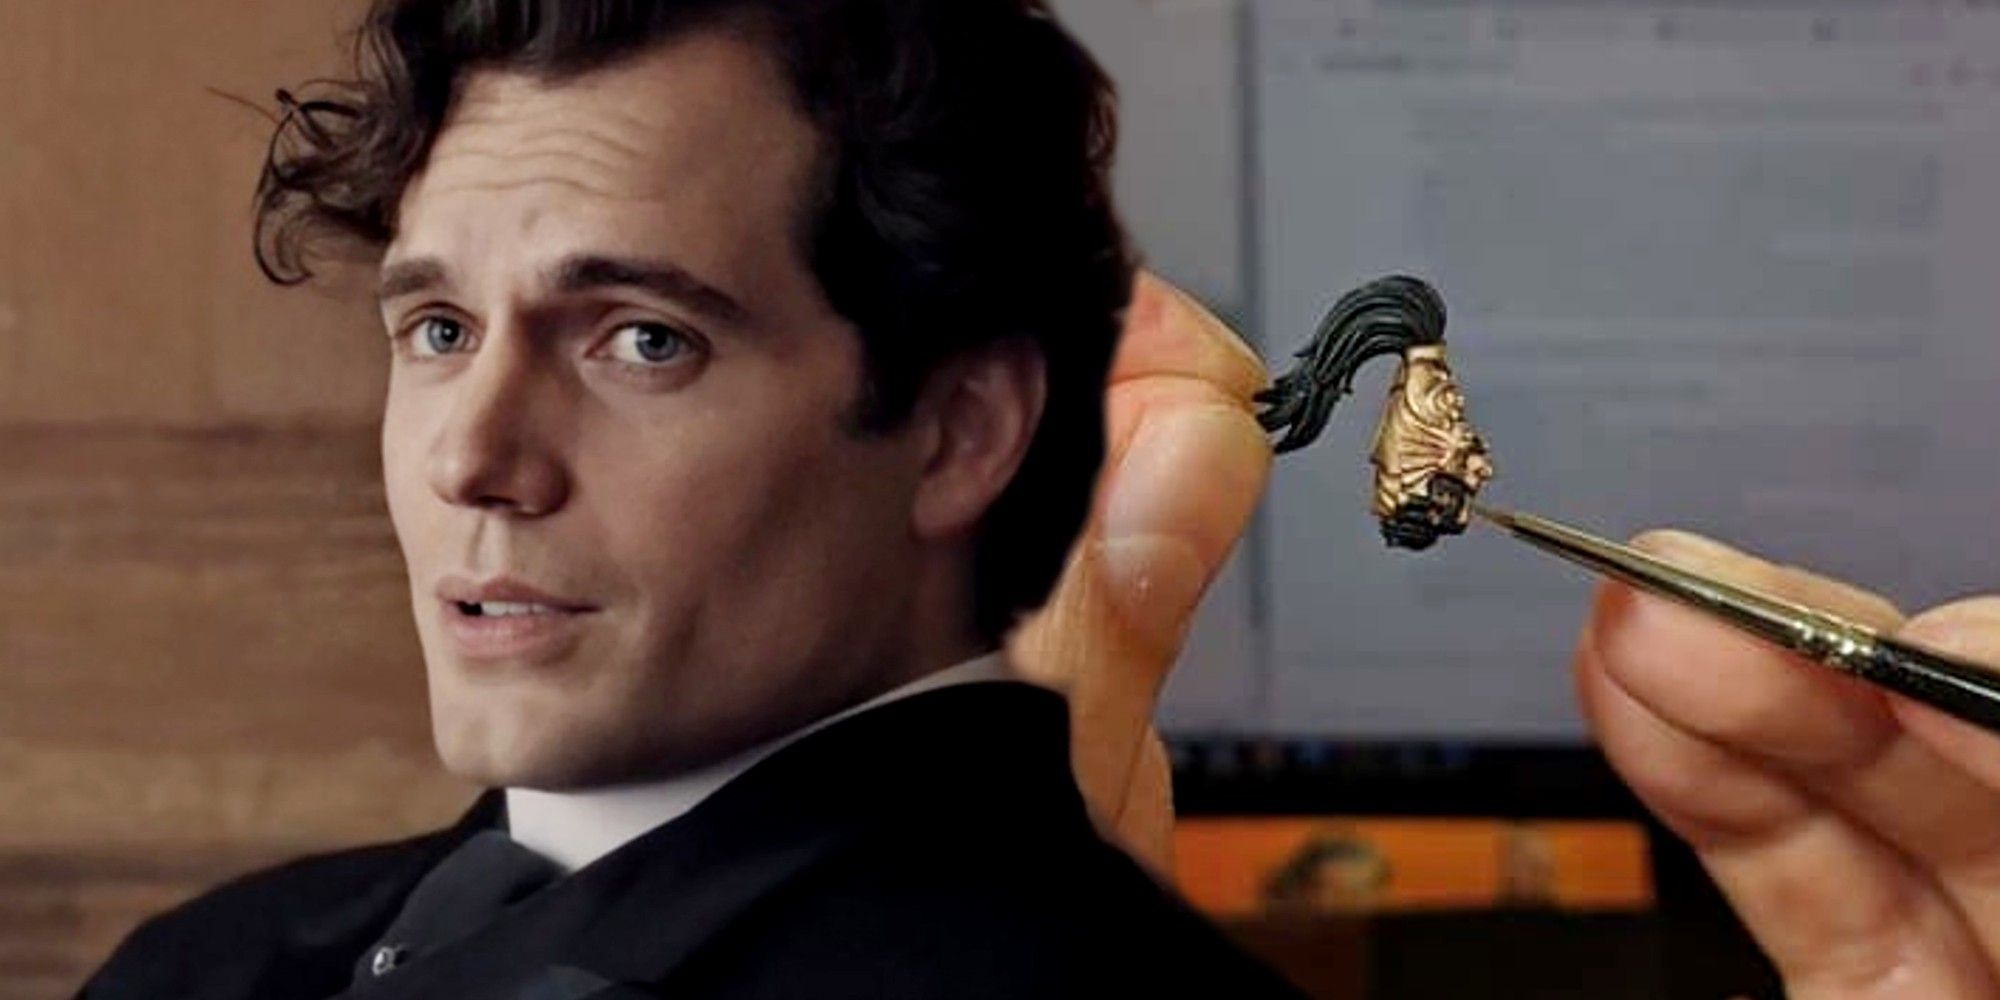 Henry Cavill Fans Defend His Warhammer Hobby After It Was Mocked